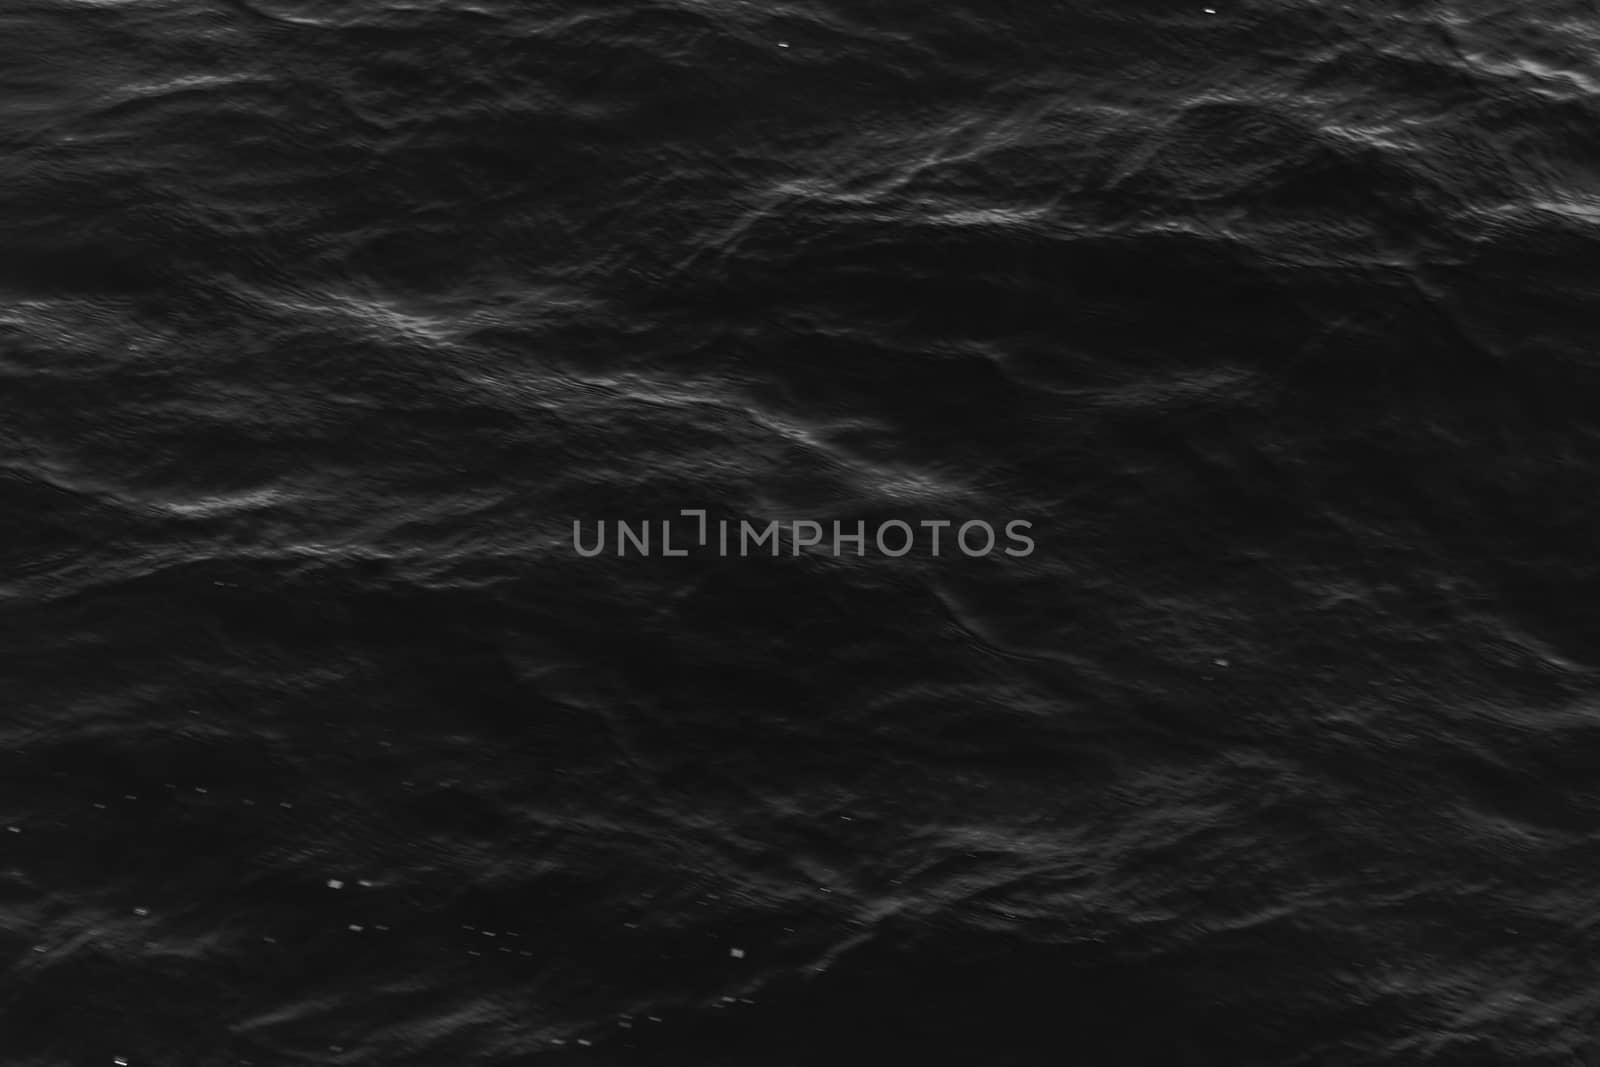 grey abstract background of wavy water surface